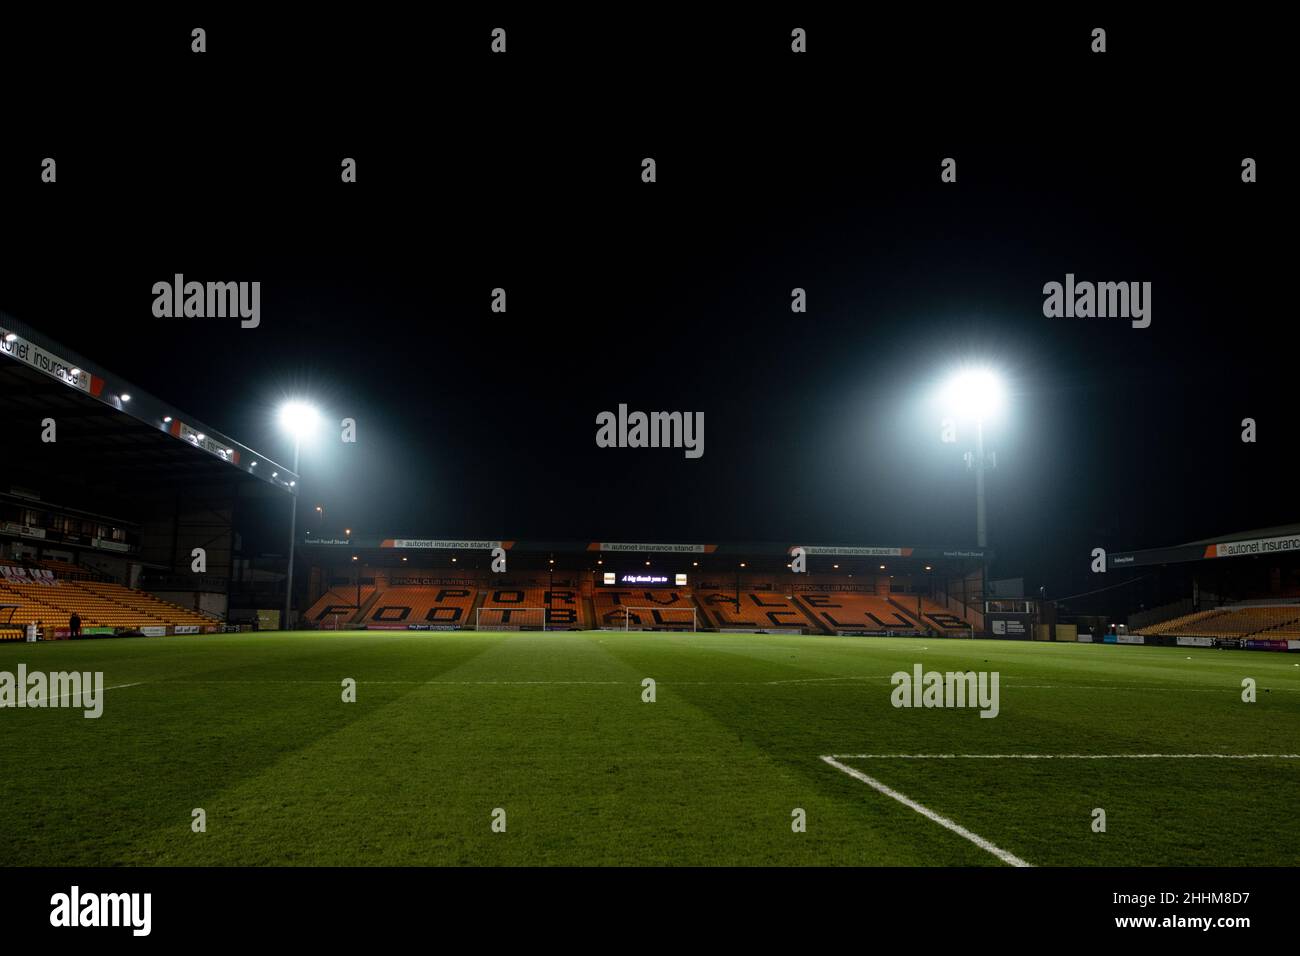 Vale Park football stadium in Stoke-on-Trent, England. Home ground of Port Vale F.C. since 1950 Stock Photo